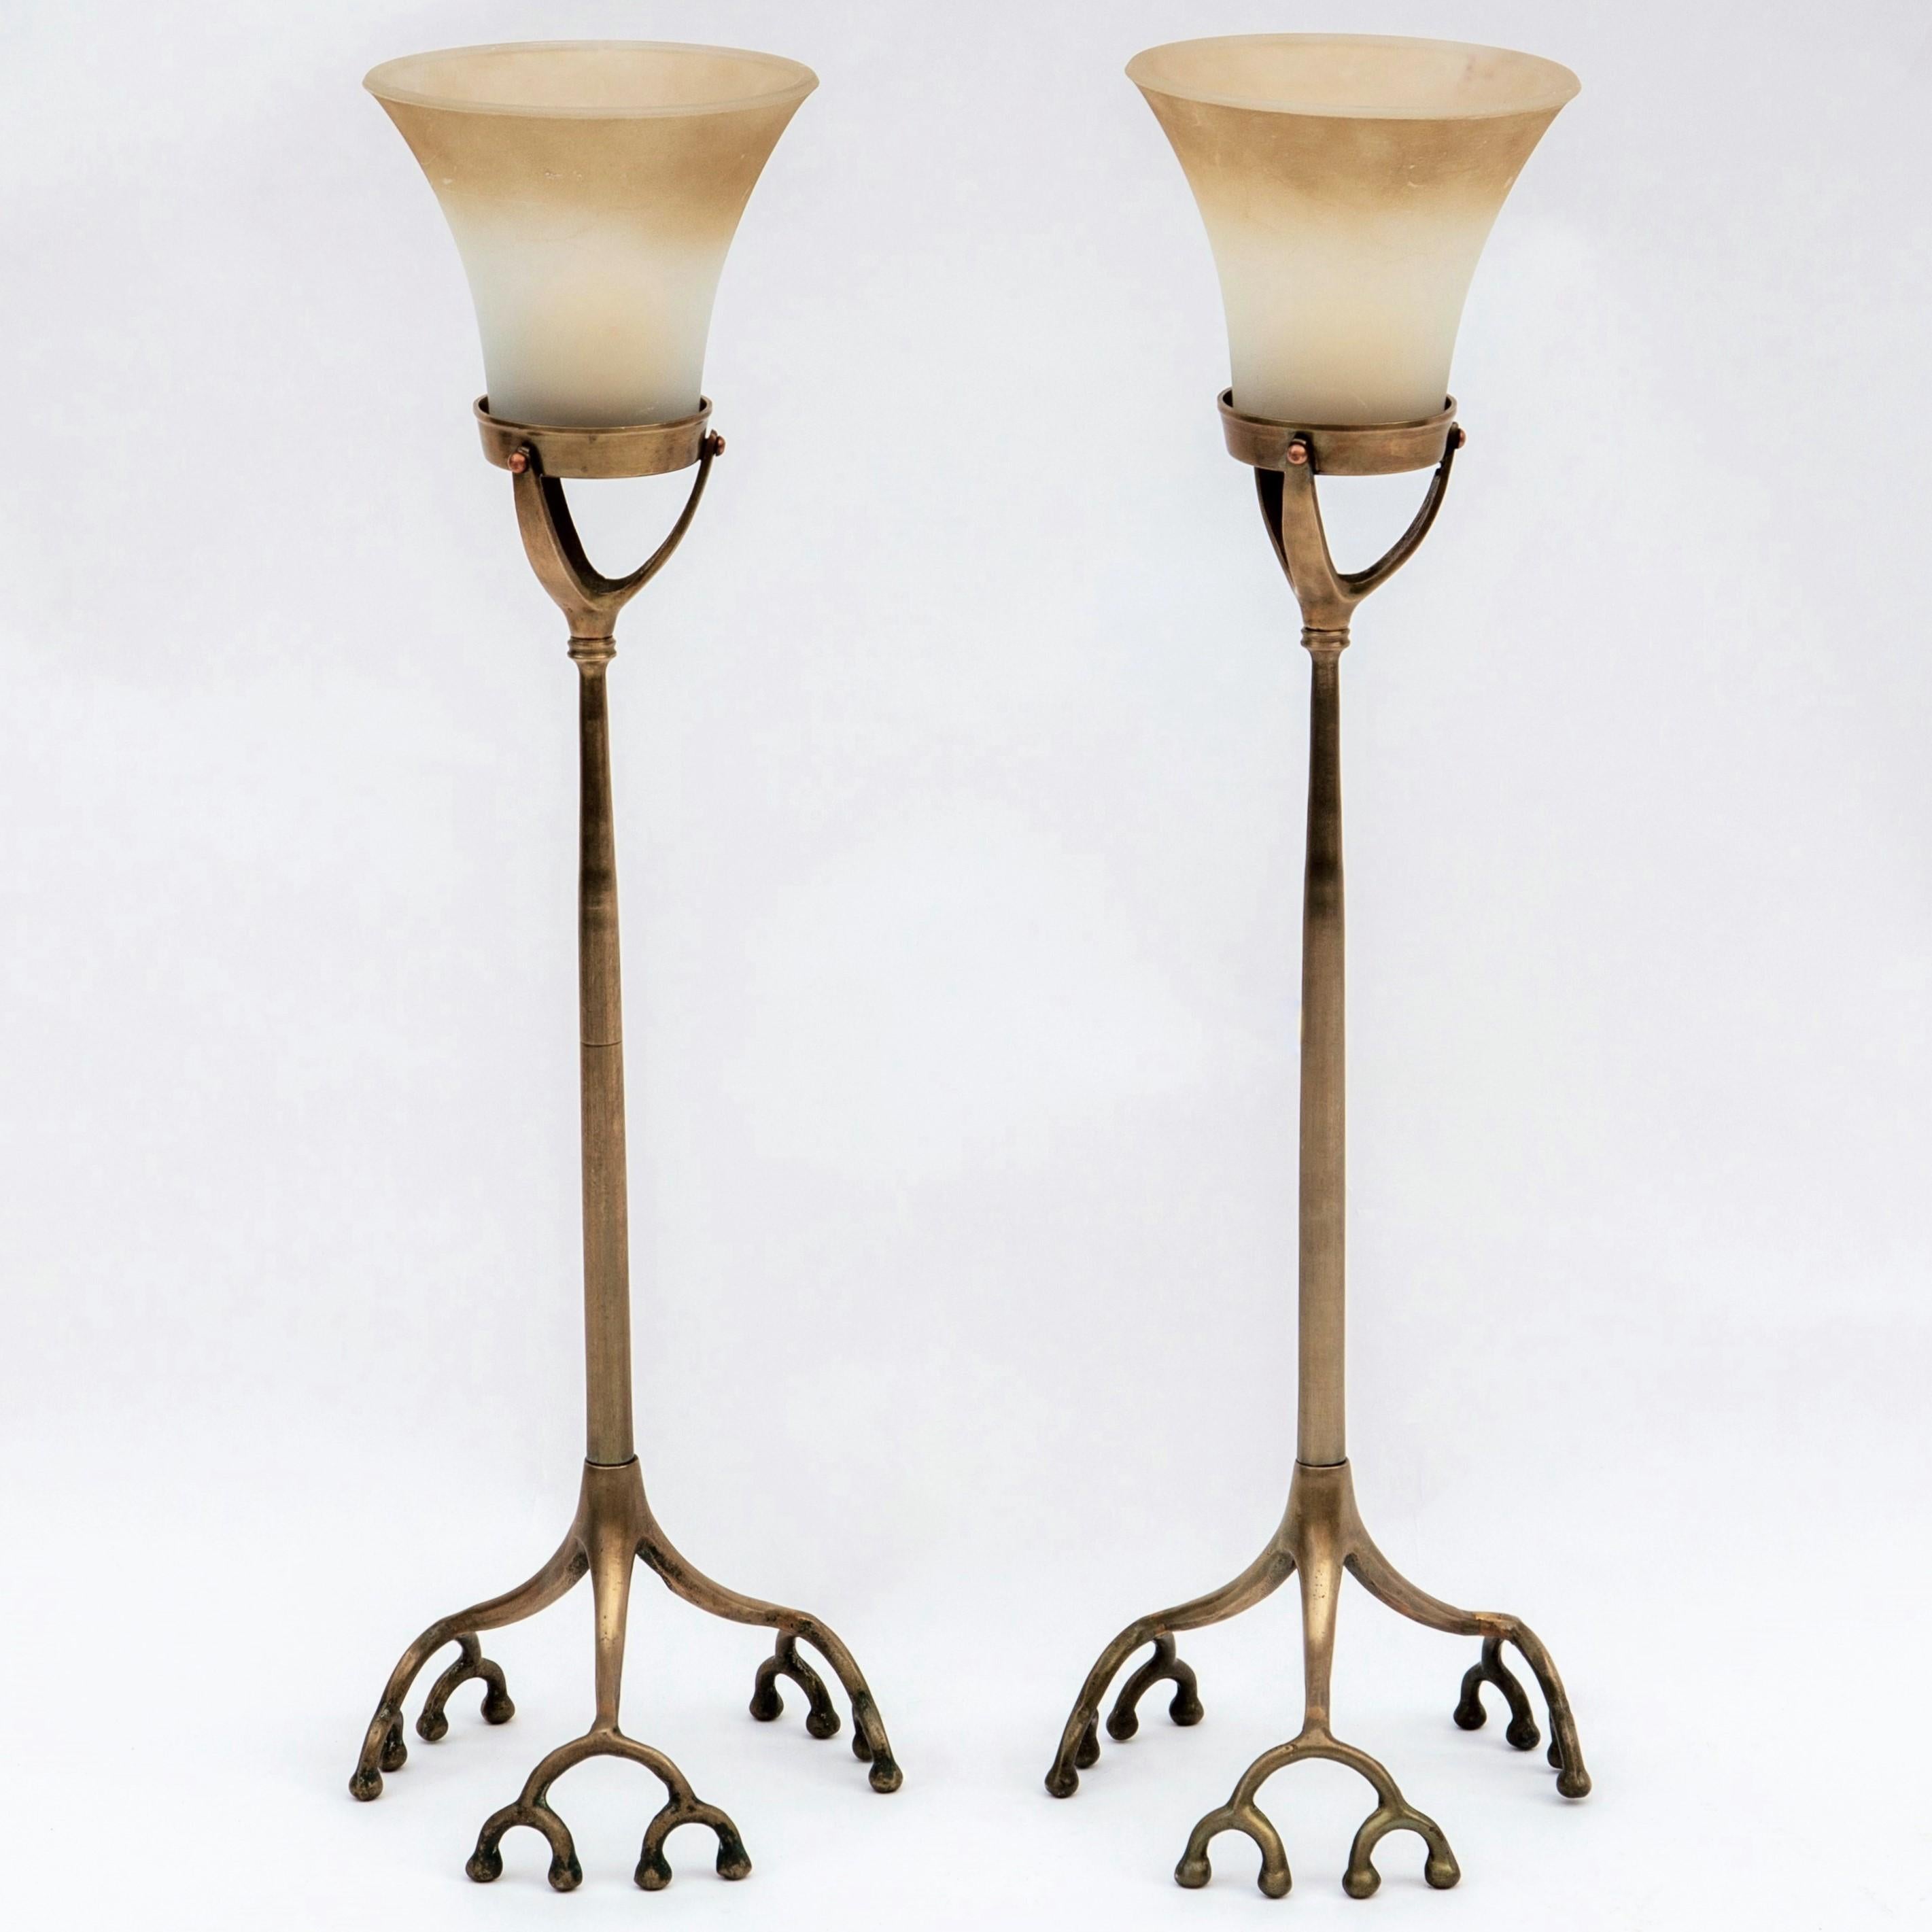 A pair of tall, solid brass, root form candleholders with a light bronze patina. They are replicas of the Tiffany Studios New York, 